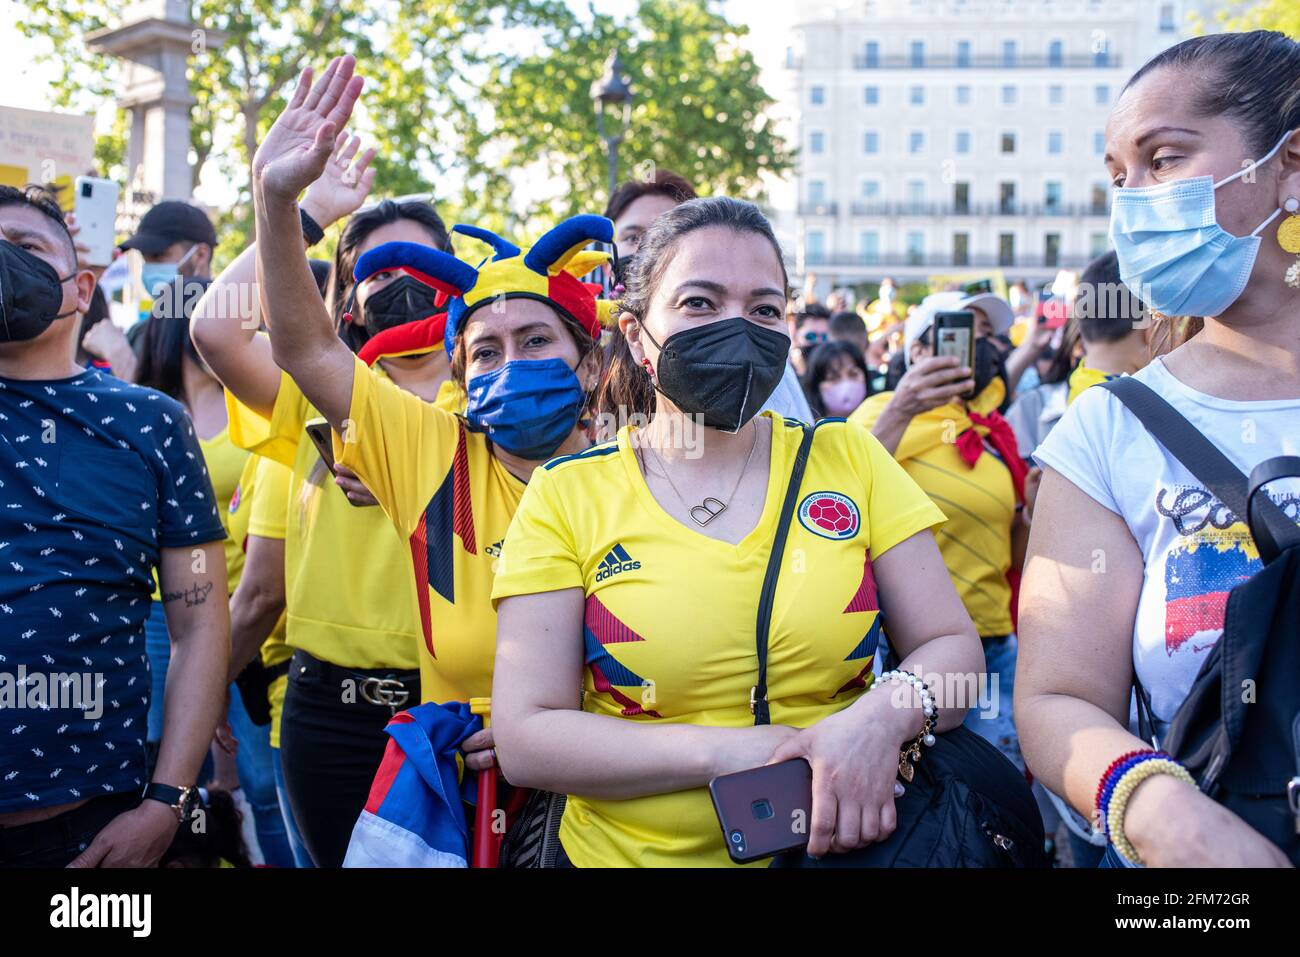 Madrid, Spain, 6th may 2021. Protesters attend a demonstration in support of Colombian citizens fighting violent repression of anti-government protests. Protests in Colombia continue after government withdraws tax reform, leading to deadly clashes and disorders. Credit: Roberto Arosio/Alamy Live News Stock Photo